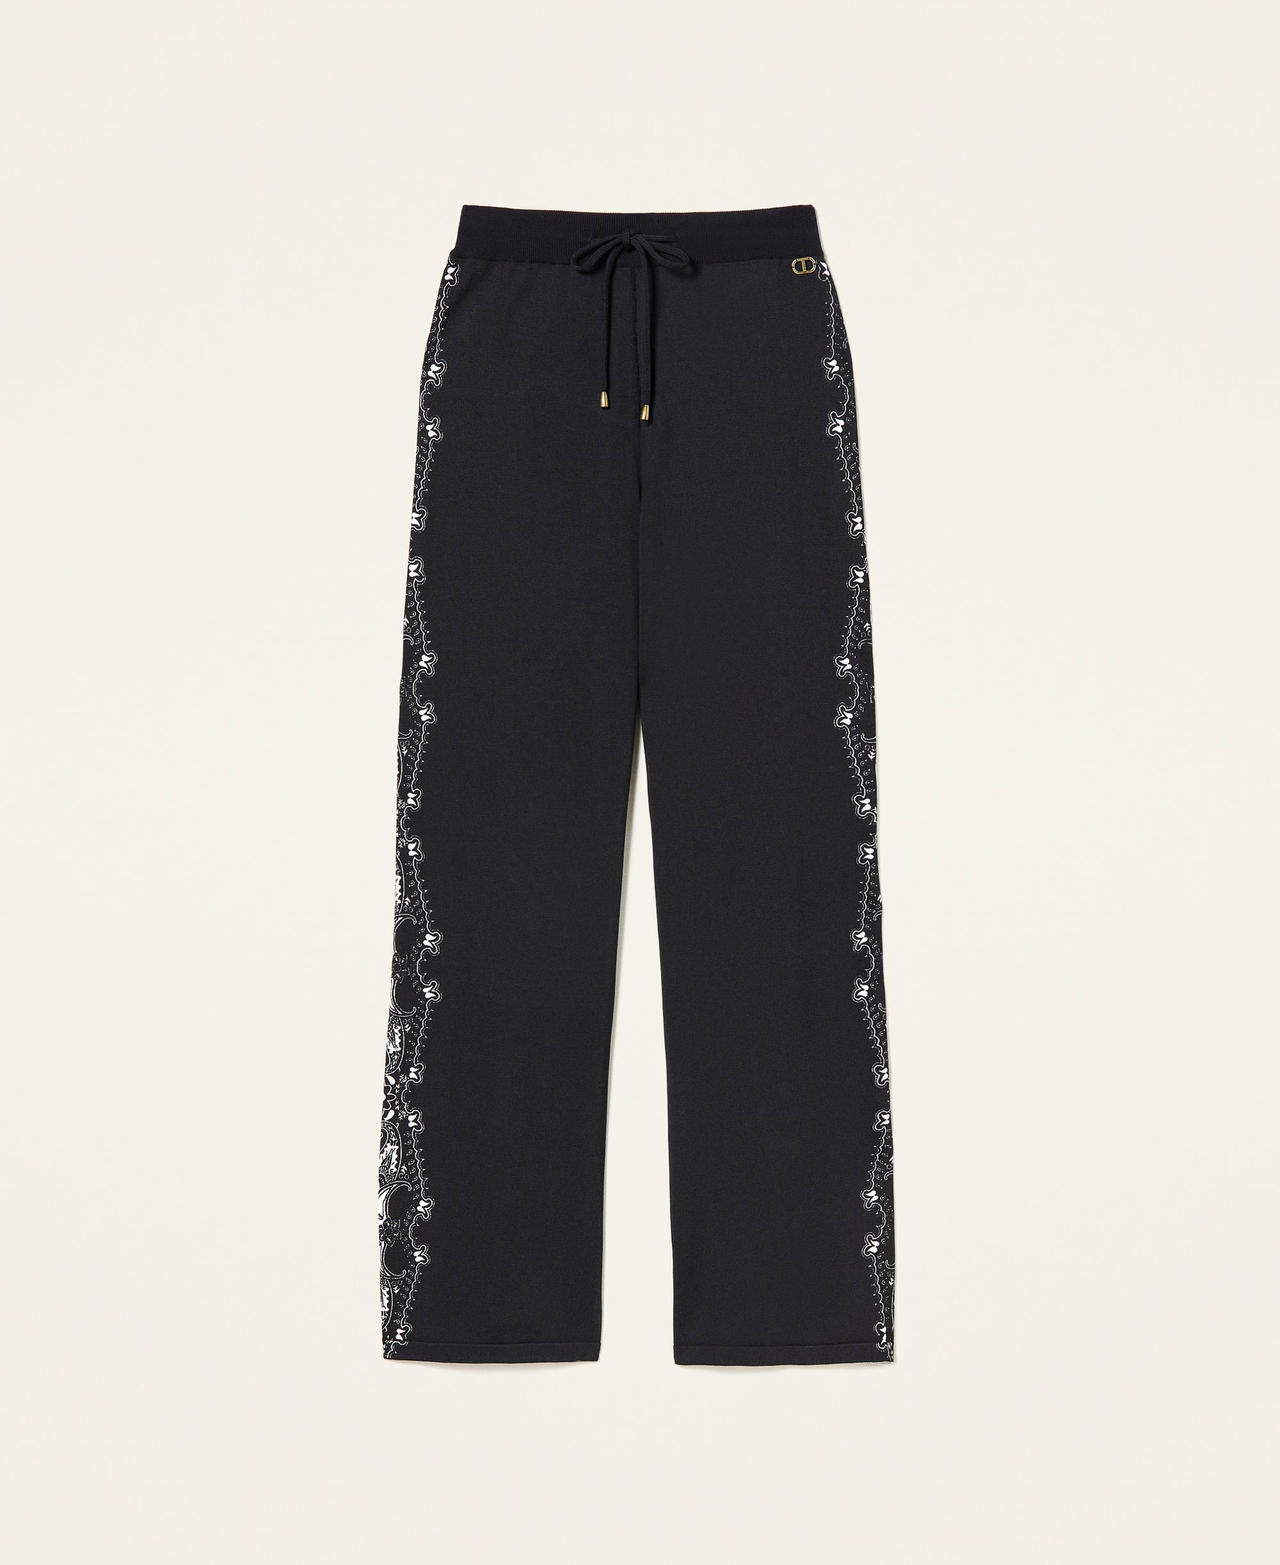 Trousers with bandanna print Black Placed Bandanna Print / Lily Woman 221TP3351-0S